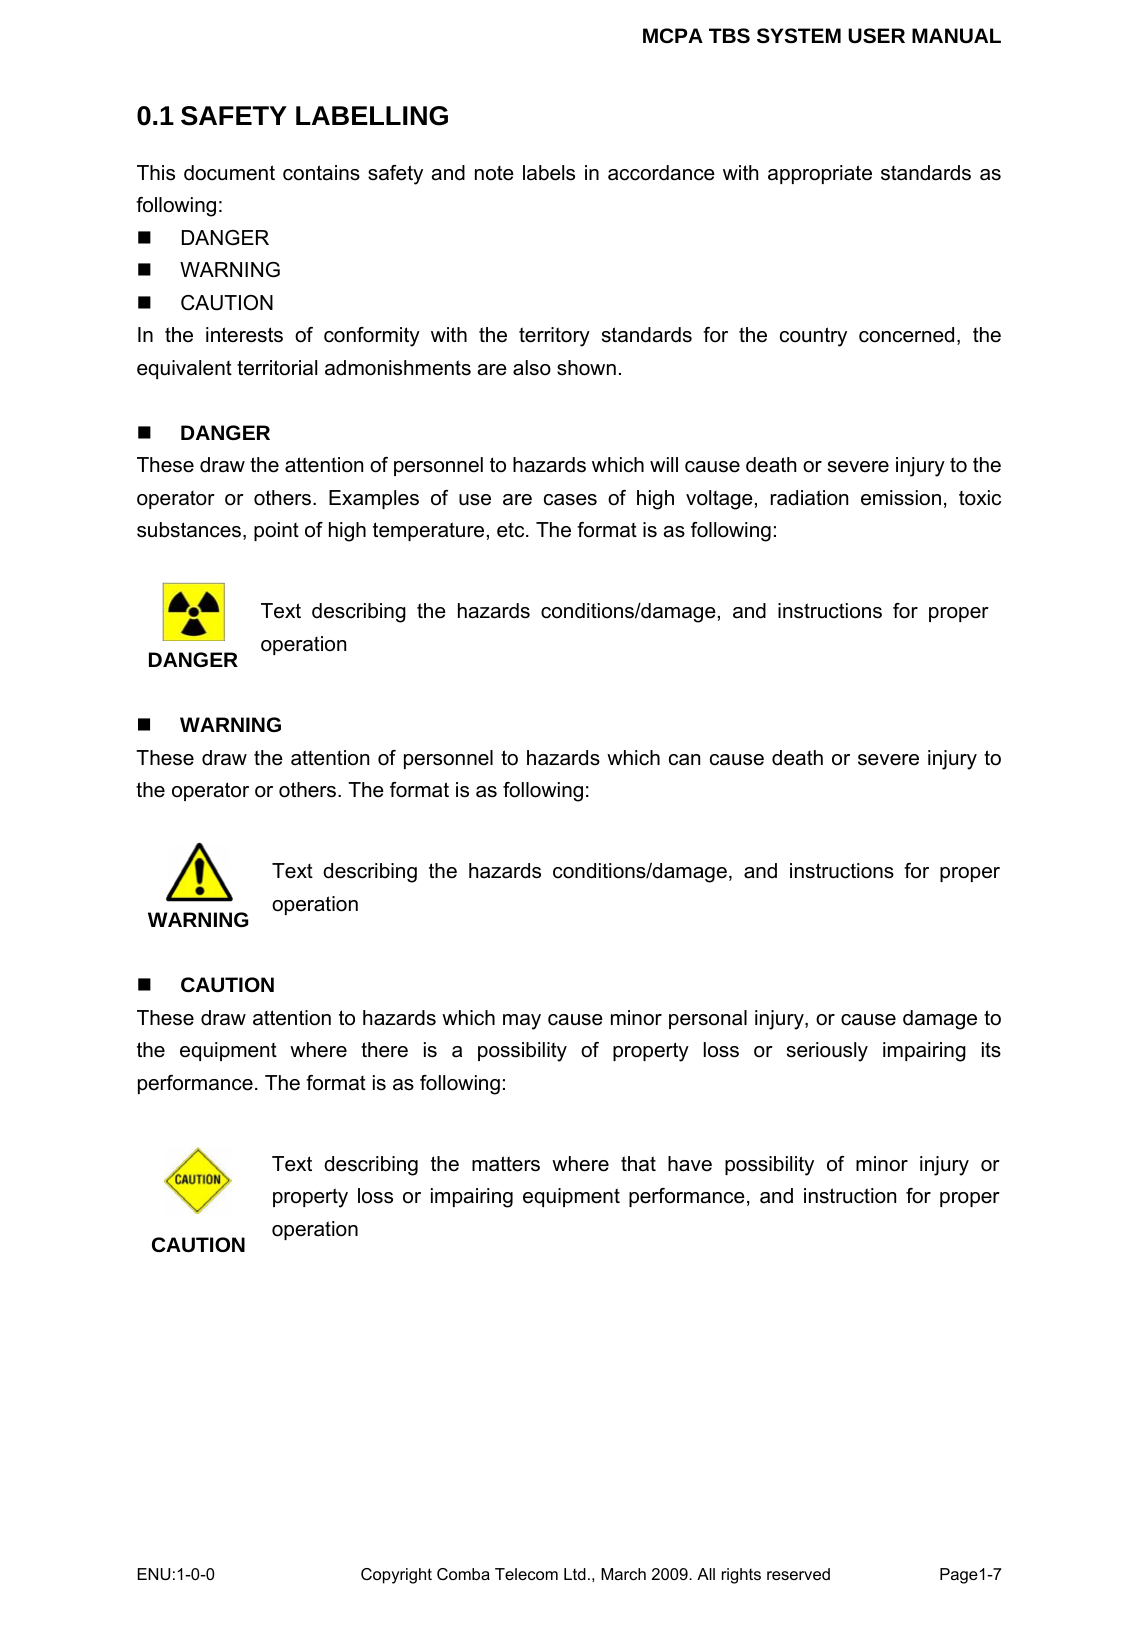 MCPA TBS SYSTEM USER MANUAL ENU:1-0-0 Copyright Comba Telecom Ltd., March 2009. All rights reserved  Page1-7    0.1 SAFETY LABELLING This document contains safety and note labels in accordance with appropriate standards as following:  DANGER  WARNING  CAUTION In the interests of conformity with the territory standards for the country concerned, the equivalent territorial admonishments are also shown.   DANGER These draw the attention of personnel to hazards which will cause death or severe injury to the operator or others. Examples of use are cases of high voltage, radiation emission, toxic substances, point of high temperature, etc. The format is as following:   DANGER Text describing the hazards conditions/damage, and instructions for proper operation   WARNING These draw the attention of personnel to hazards which can cause death or severe injury to the operator or others. The format is as following:   WARNING Text describing the hazards conditions/damage, and instructions for proper operation   CAUTION These draw attention to hazards which may cause minor personal injury, or cause damage to the equipment where there is a possibility of property loss or seriously impairing its performance. The format is as following:     CAUTION Text describing the matters where that have possibility of minor injury or property loss or impairing equipment performance, and instruction for proper operation    